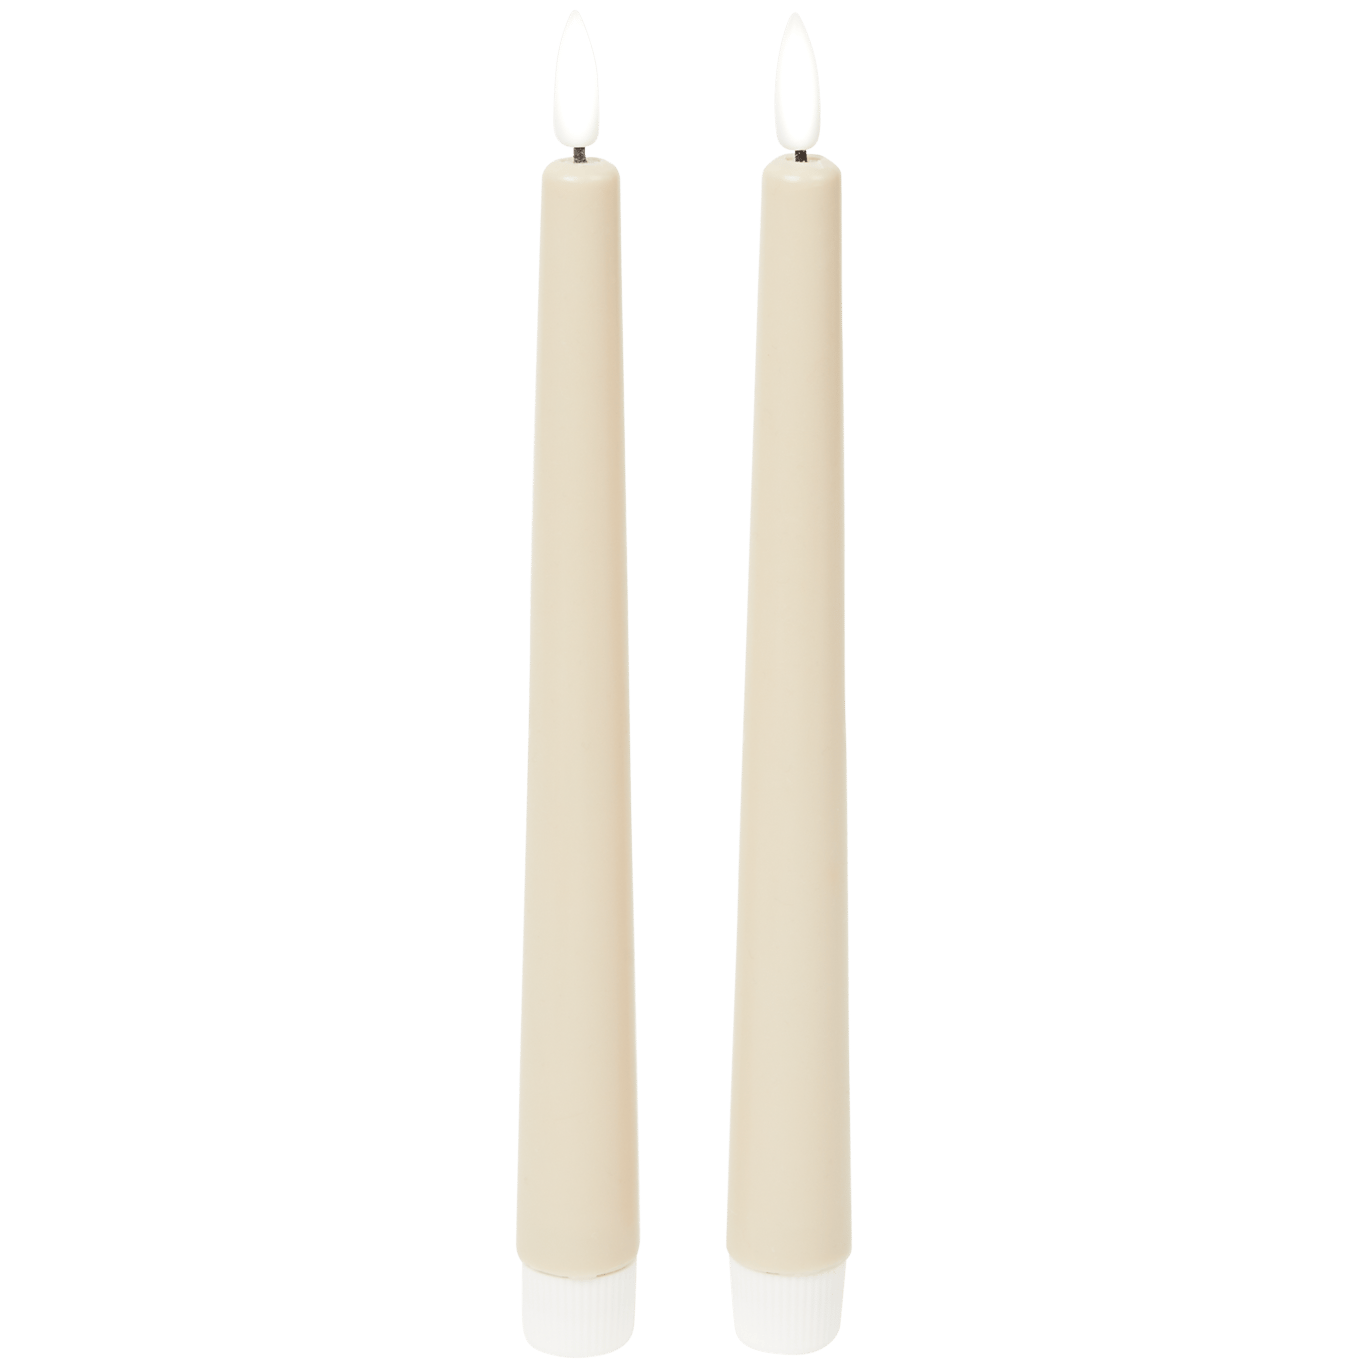 Candele LED lunghe